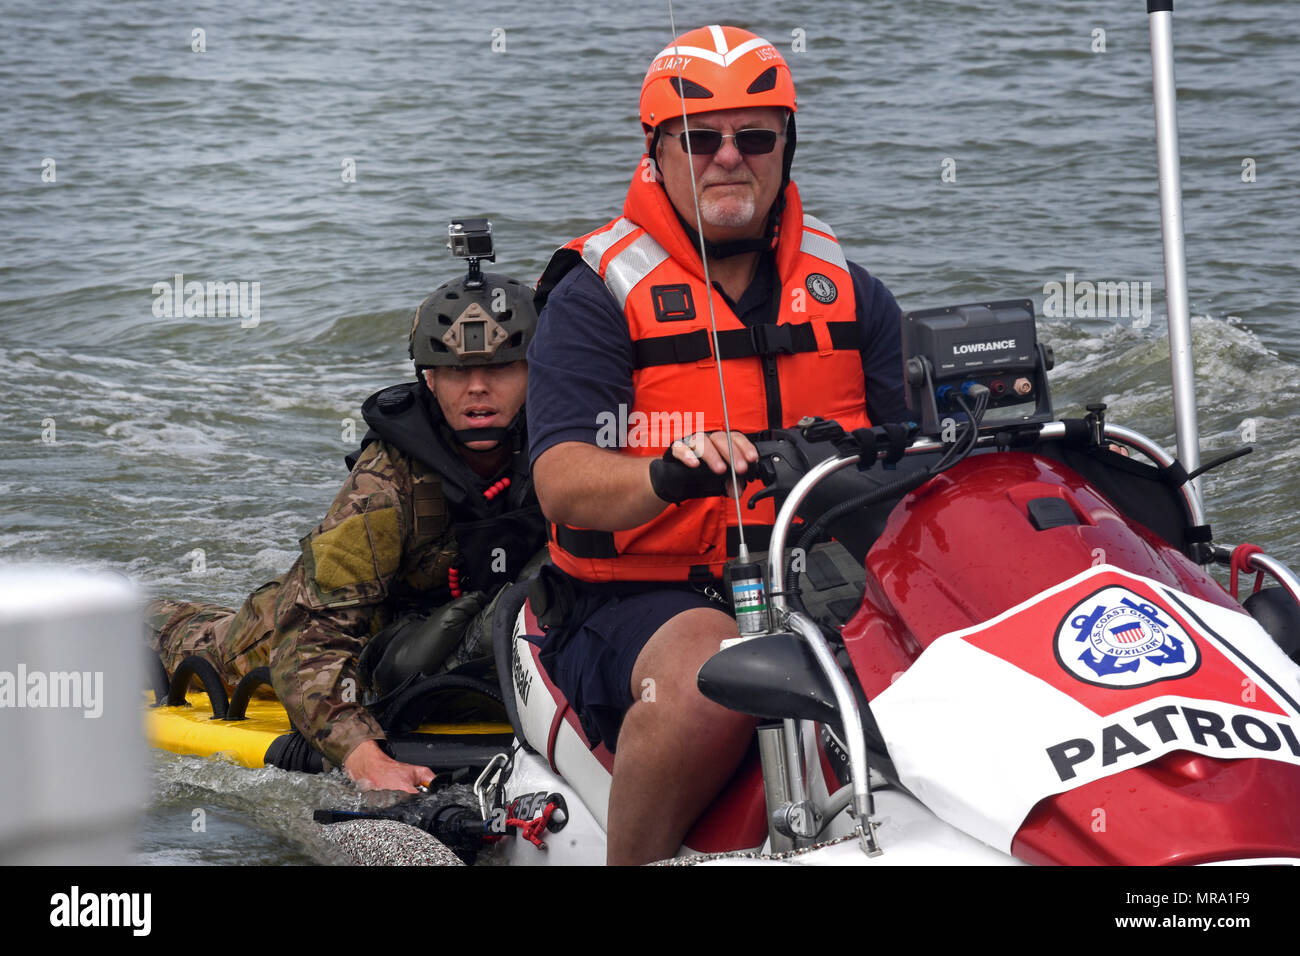 Master Sgt. James Henderson, 181st Weather Flight special operations weatherman, rides with a U.S. Coast Guard Auxiliary member to drop off his parachute gear after a deliberate water drop into Lake Worth in Fort Worth, Texas, May 20, 2017. The mission allowed 12 service members to parachute out of a C-130 Hercules from an altitude of 1000 feet into Lake Worth using MC-6 parachutes. (Texas Air National Guard photo by Staff Sgt. Kristina Overton) Stock Photo